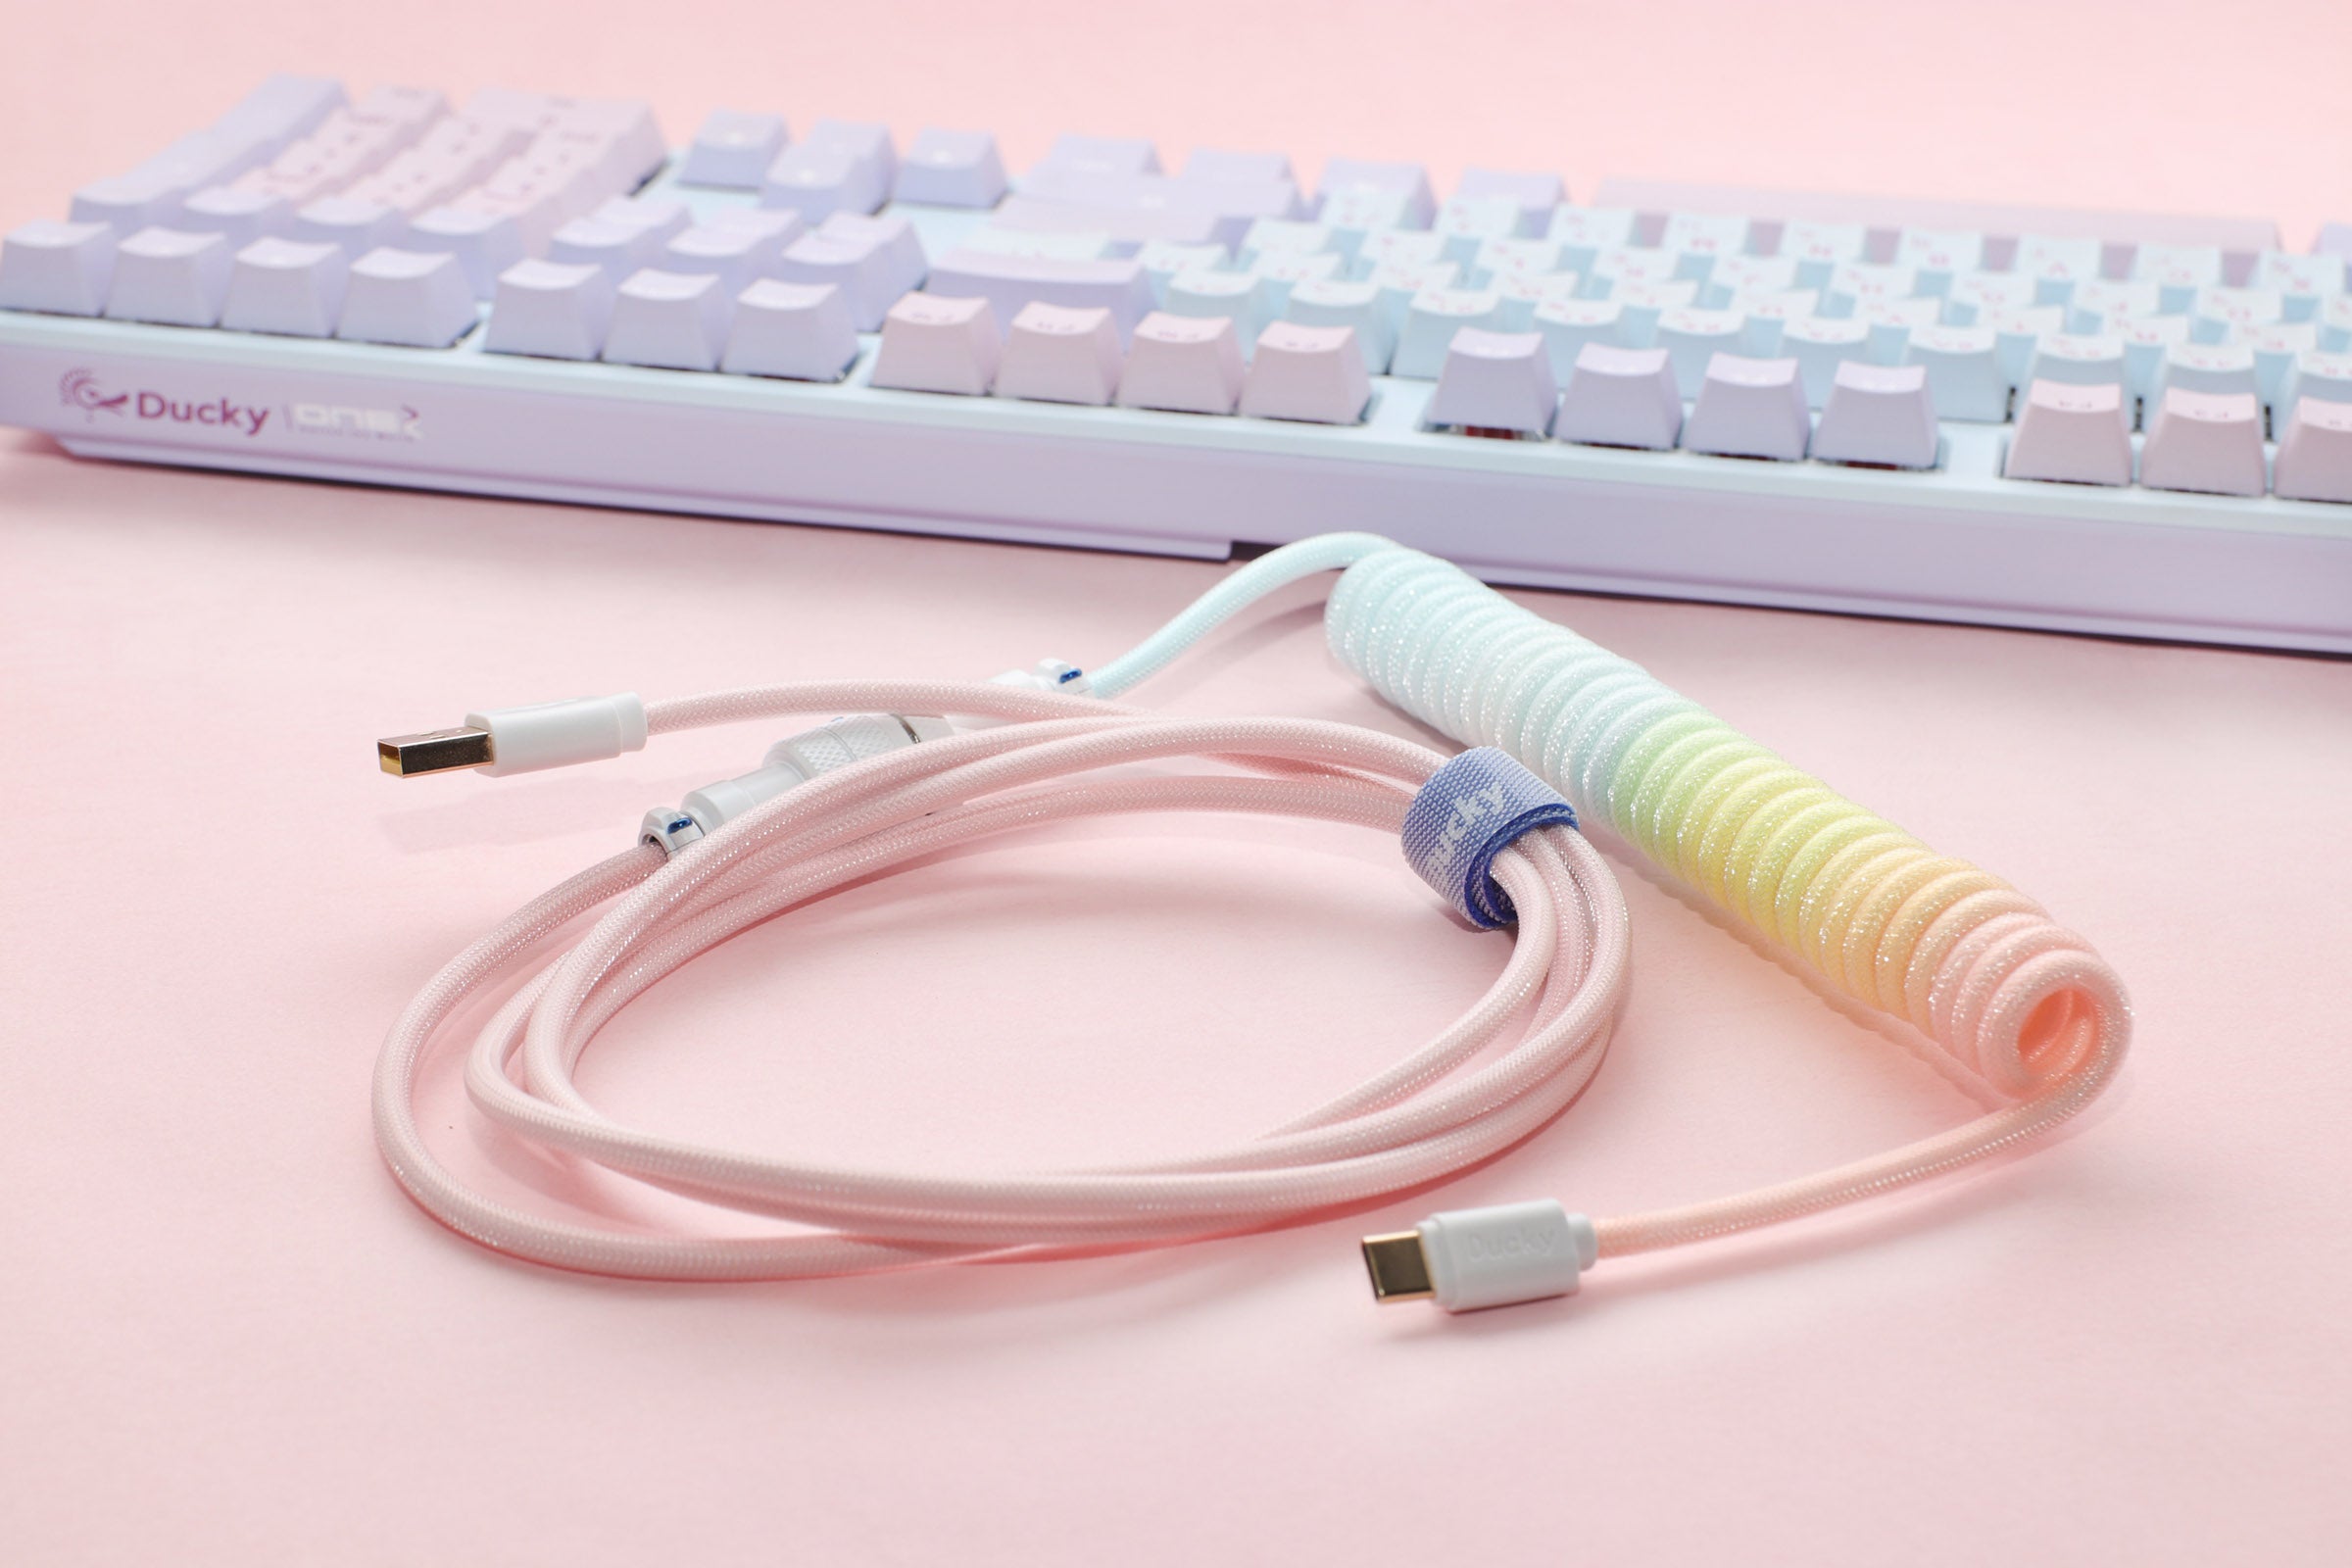 Ducky Cotton Candy Coiled USB Cable V2 MK2JAWHTWV |40286|